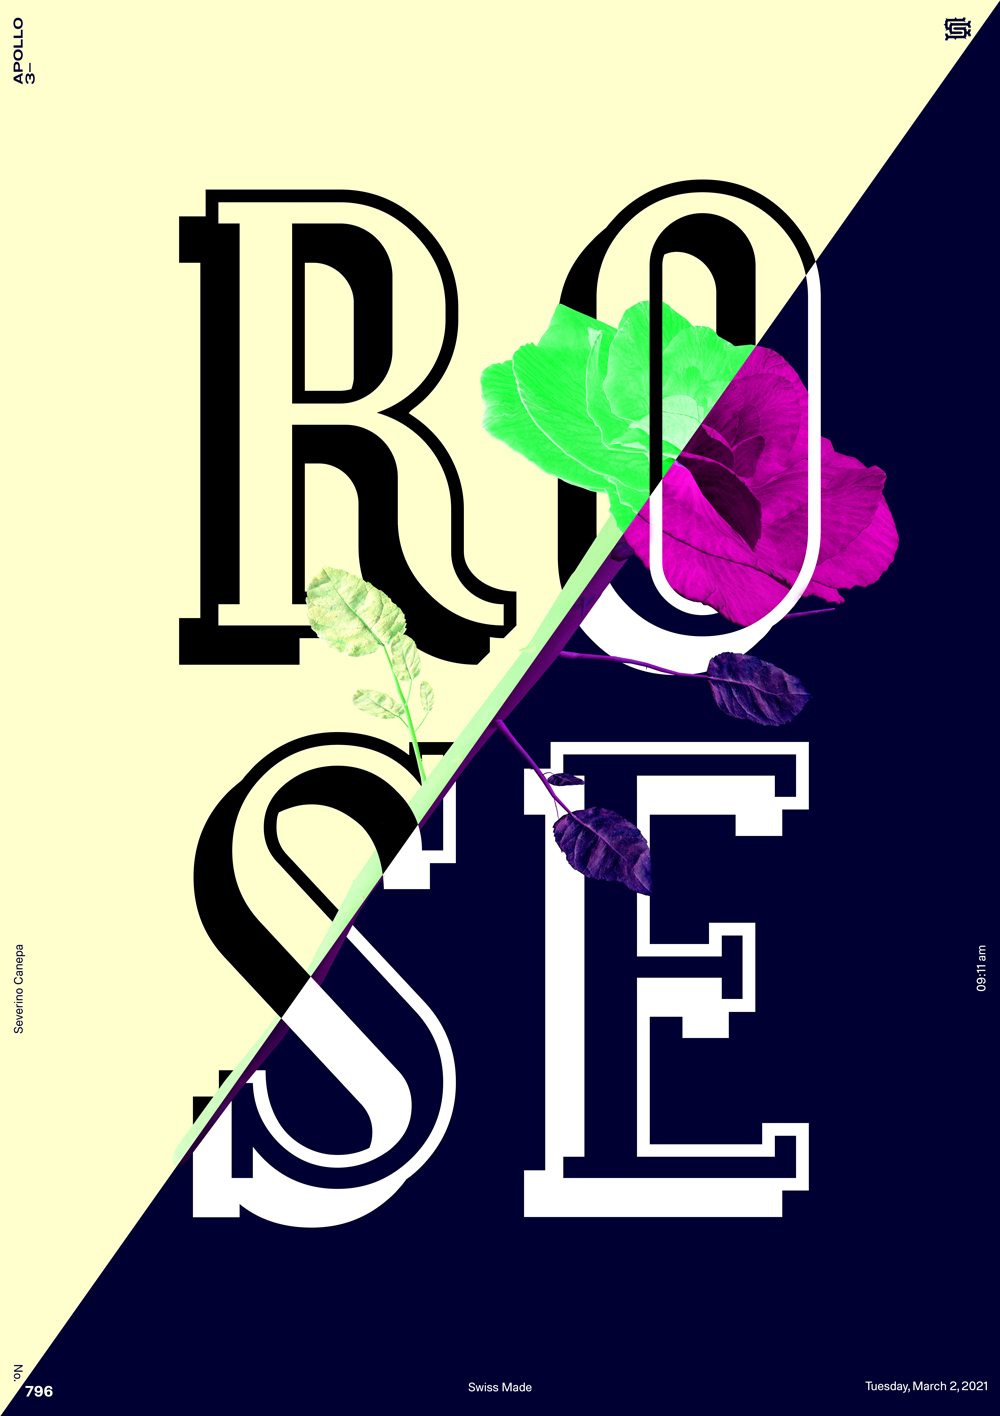 Contrasted design made with large letters and a rose